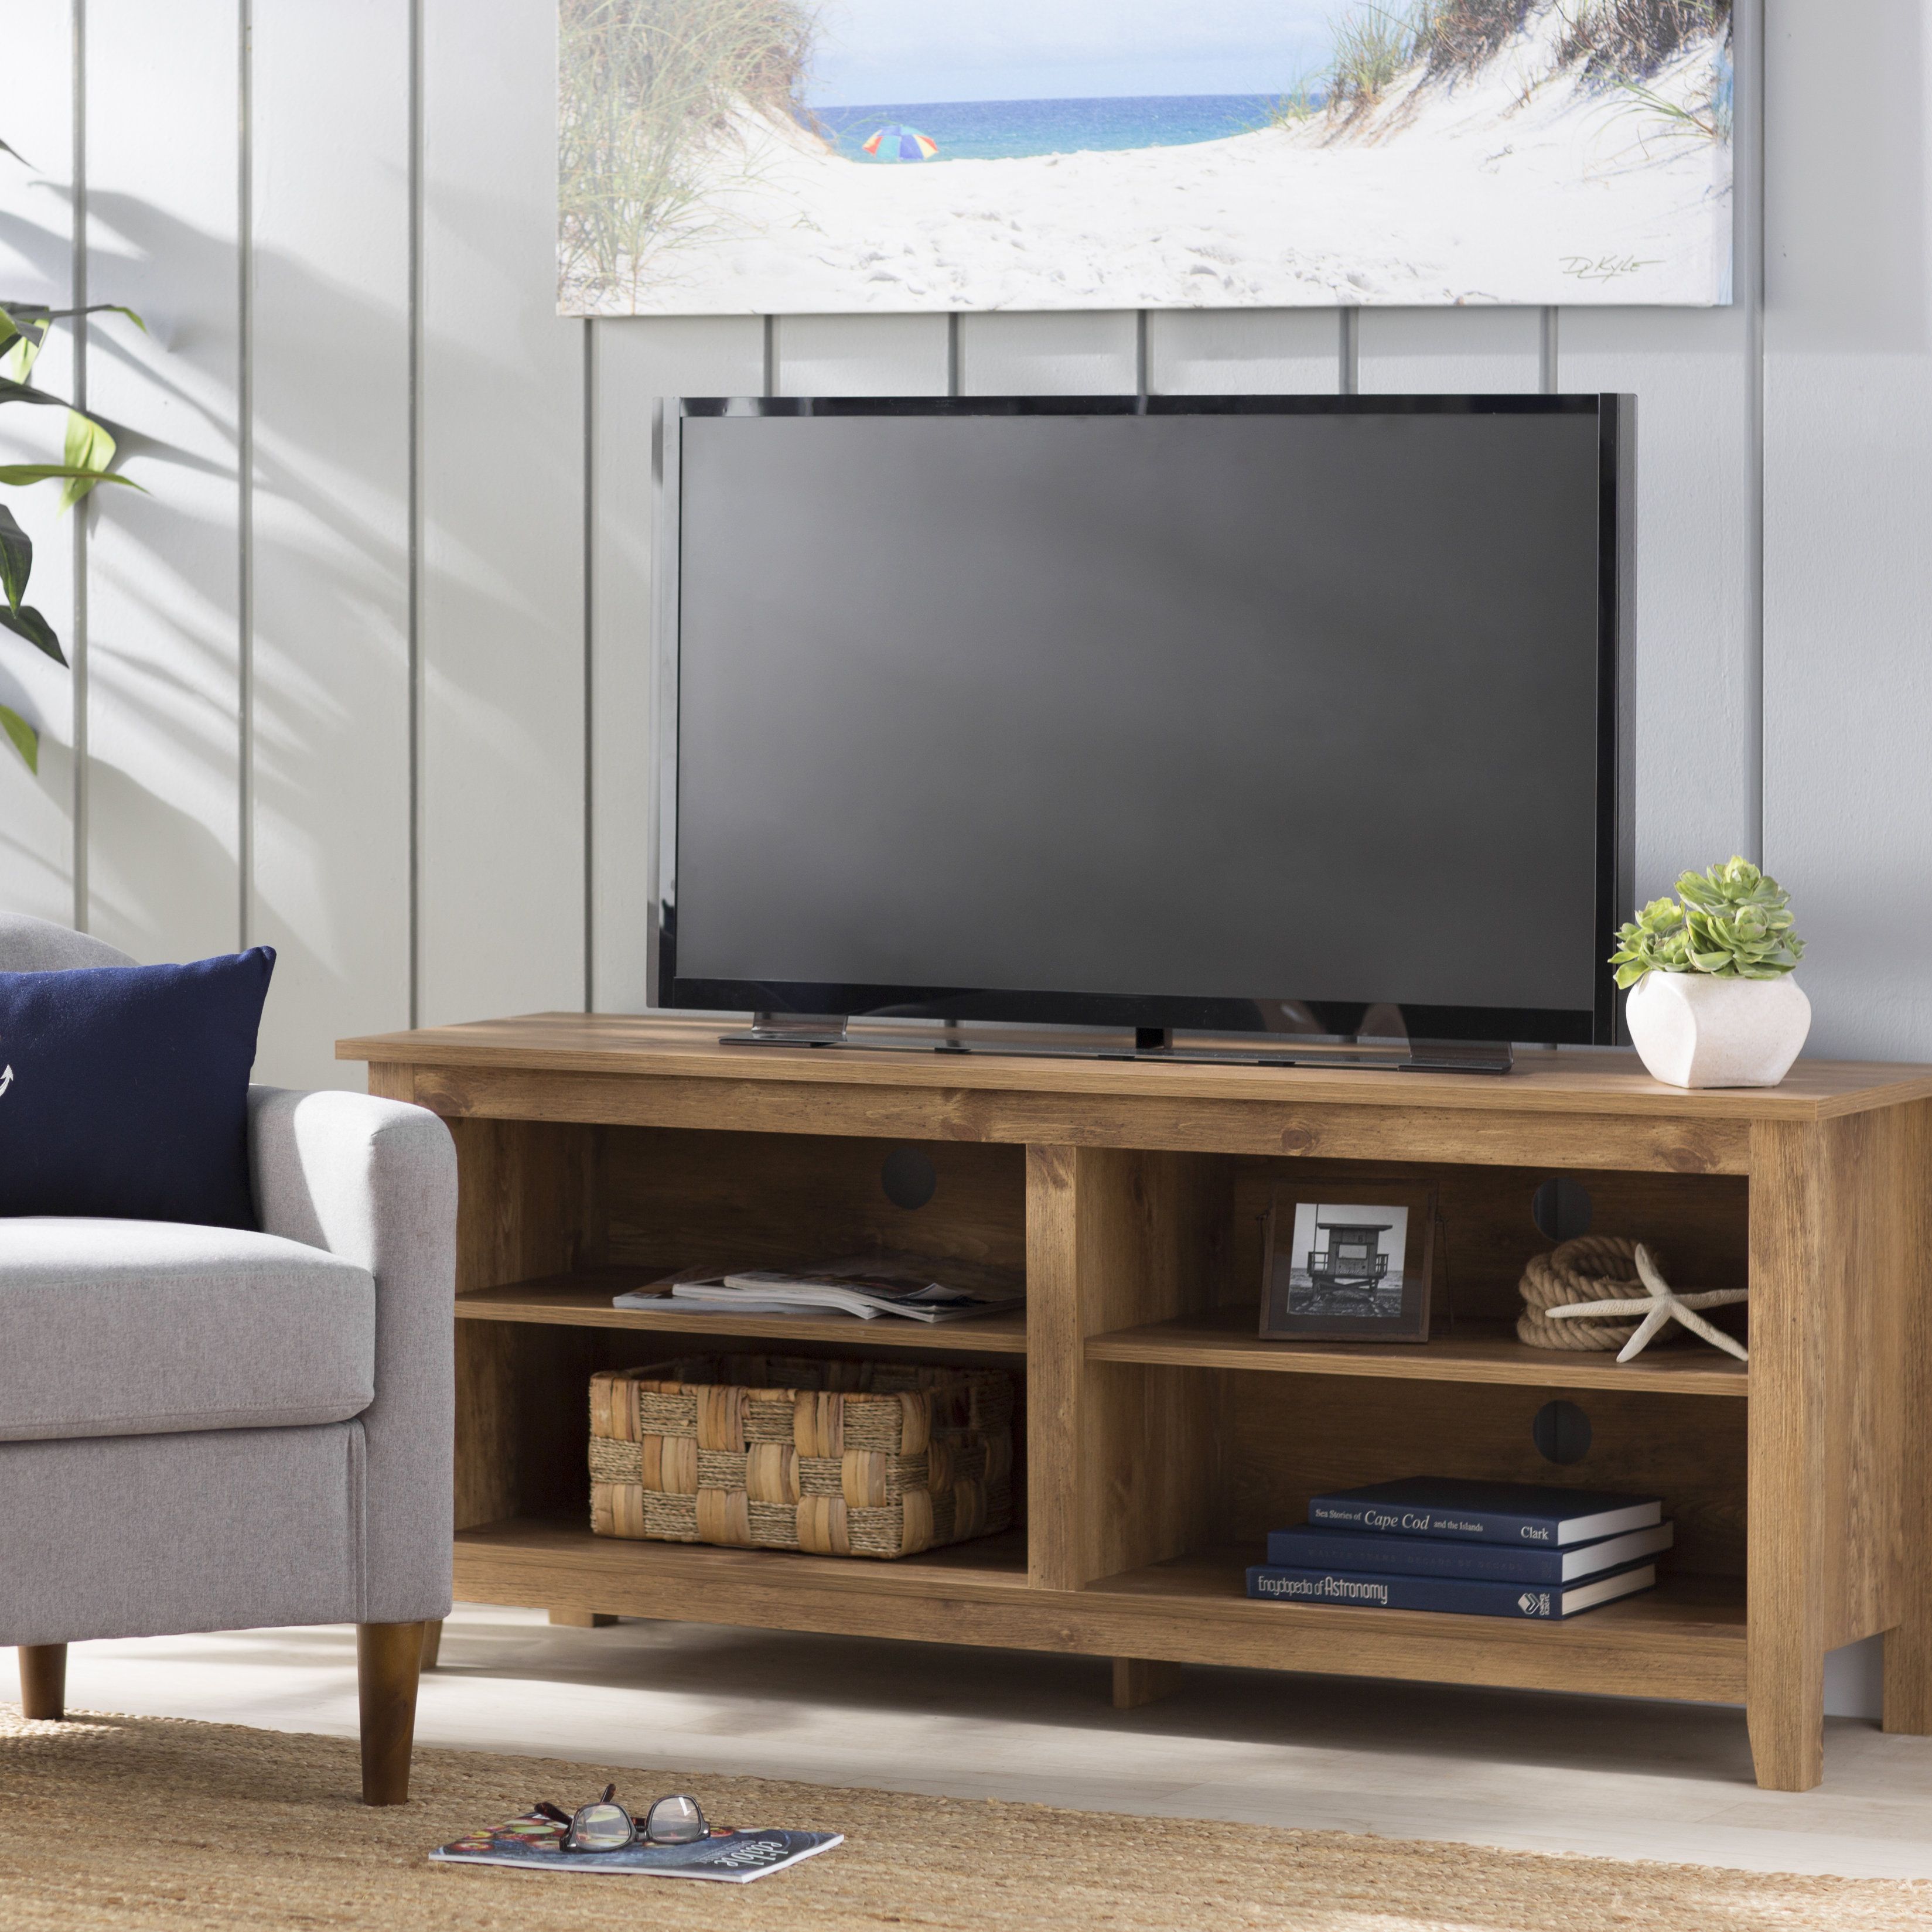 Tv Stands & Entertainment Centers You'll Love | Wayfair In Ducar 84 Inch Tv Stands (View 29 of 30)